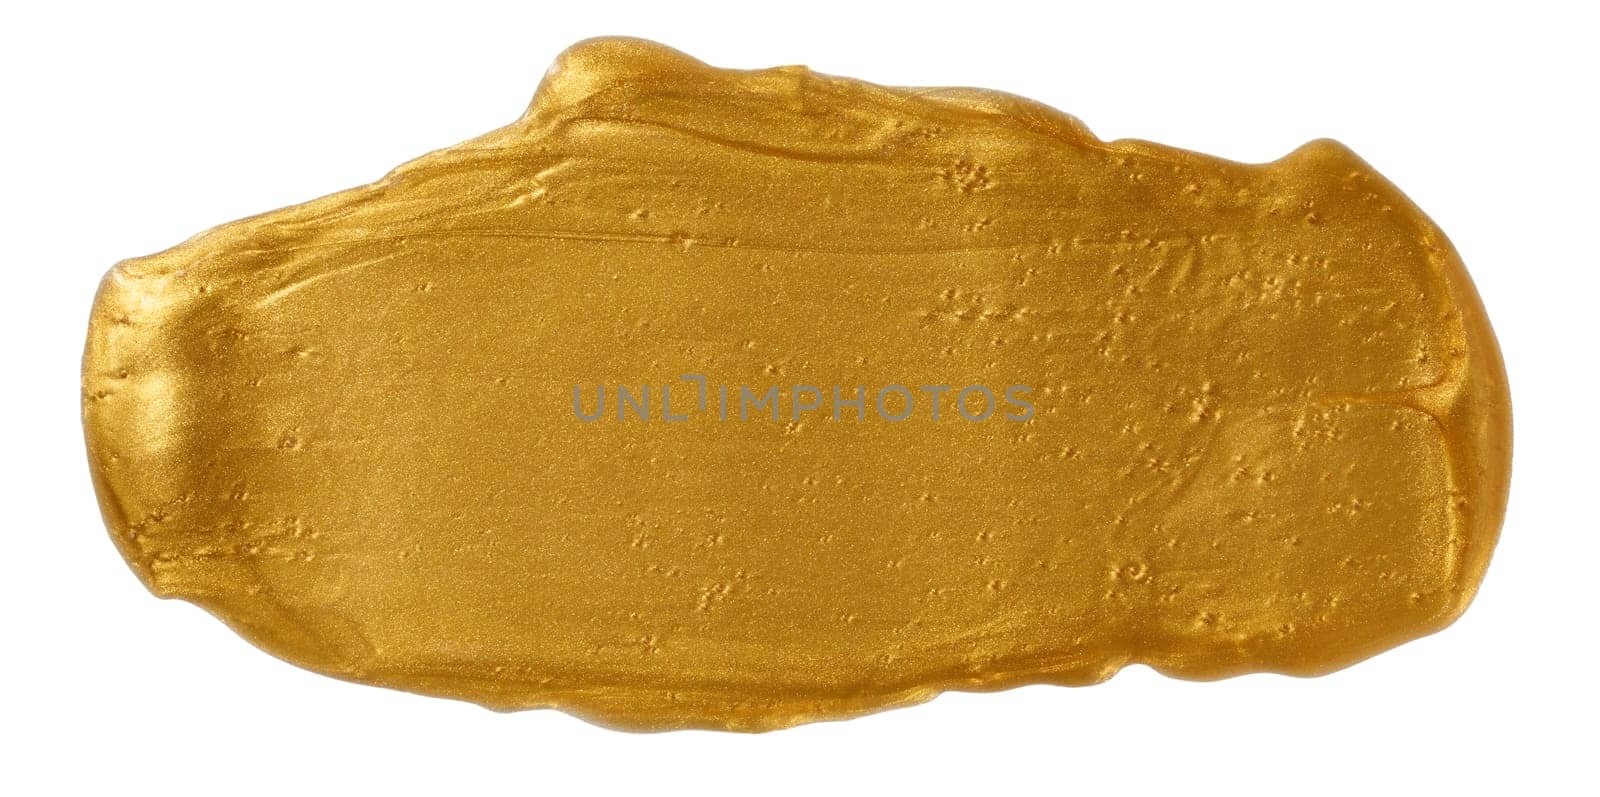 Sample of gold glitter gel with small particles isolated on white background, texture of cosmetic products like highlighter by ndanko